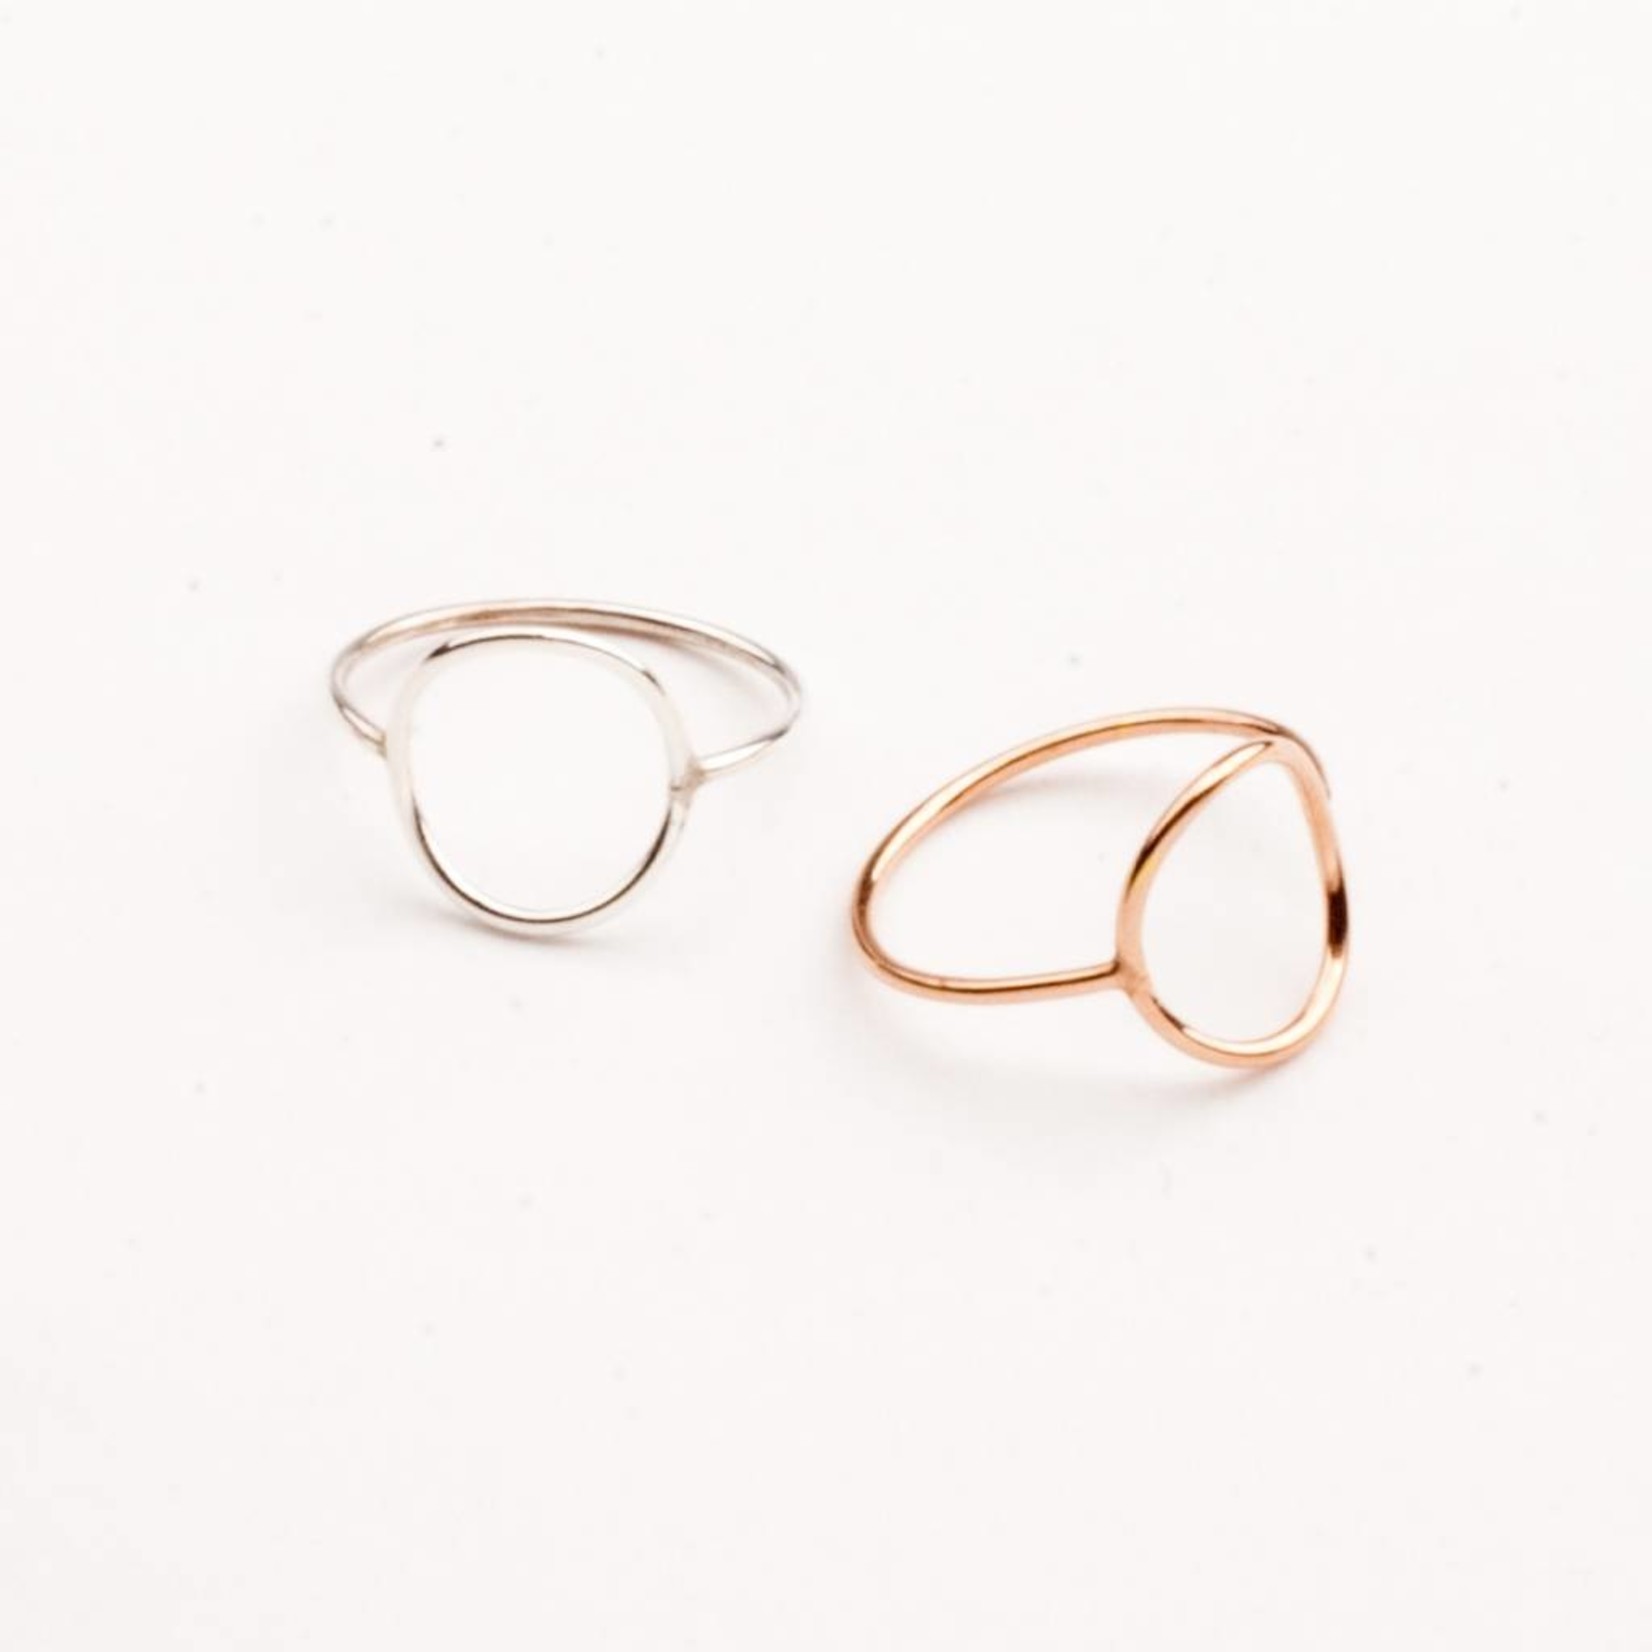 charlotte wooning ring geometry circle - zilver